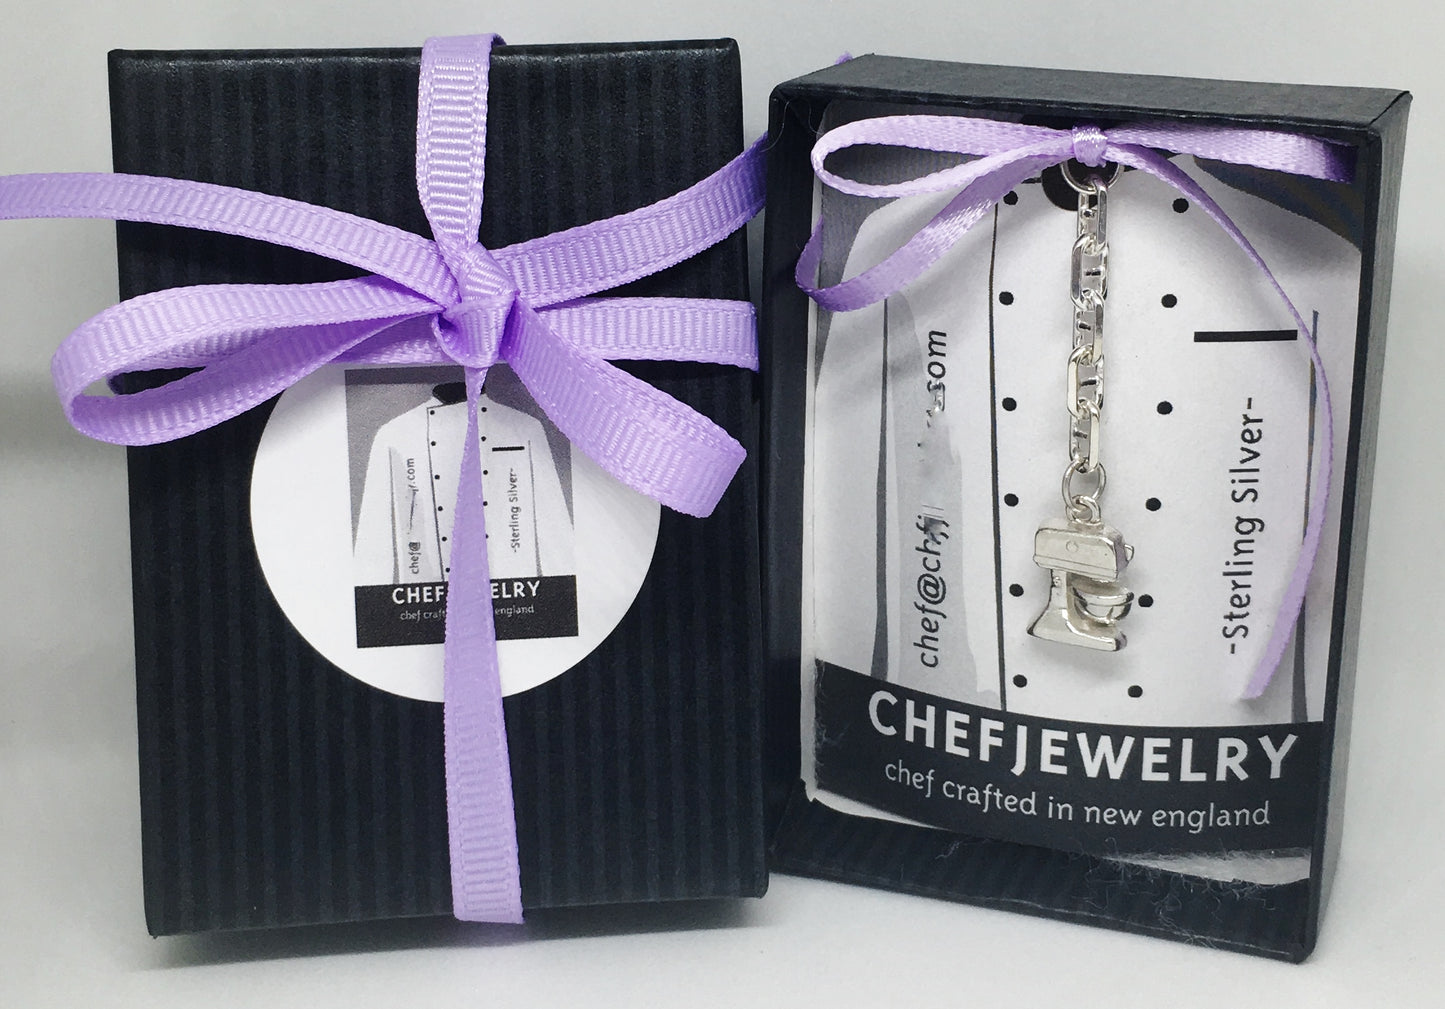 Your charm will arrive in this custom ChefJewelry packaging